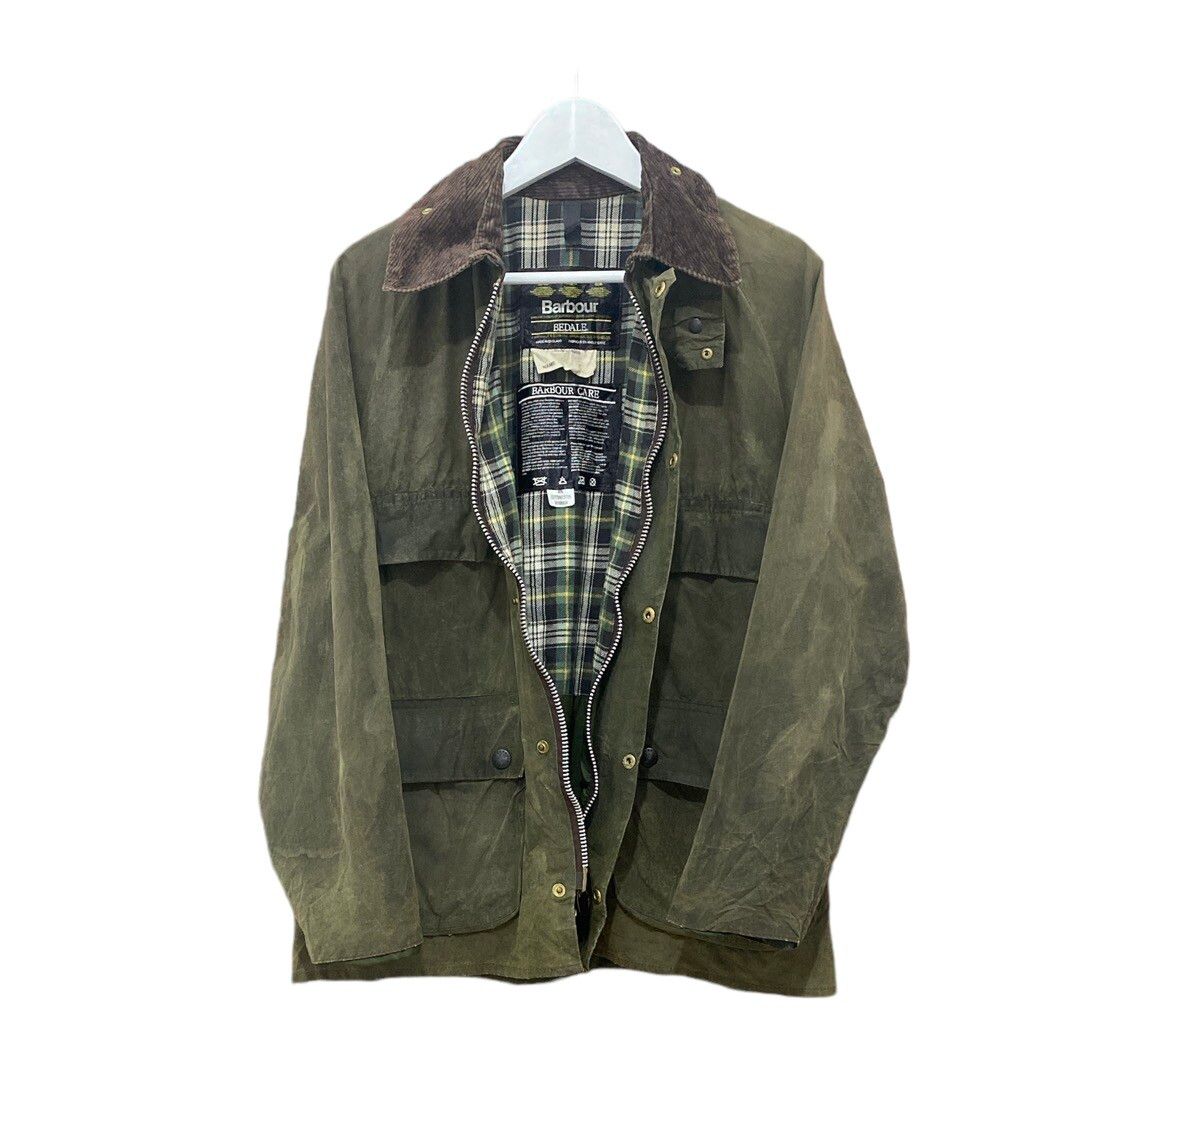 Barbour Bedale Waxed Cotton Jacket Made England - 3